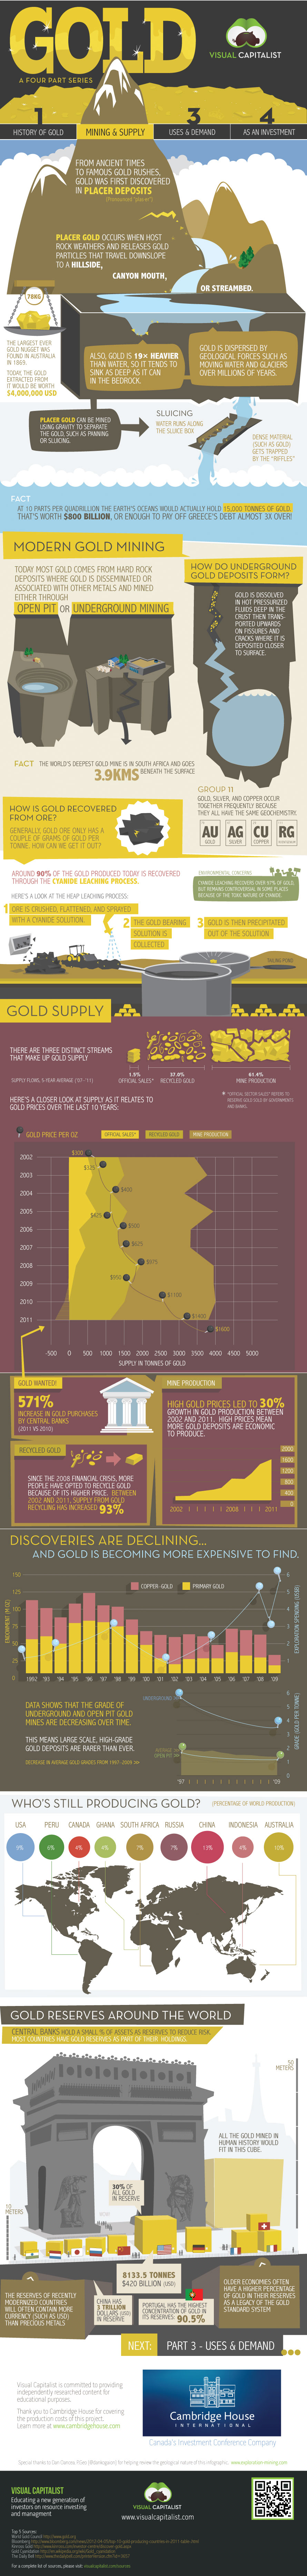 Gold Mining and Supply-Infographic